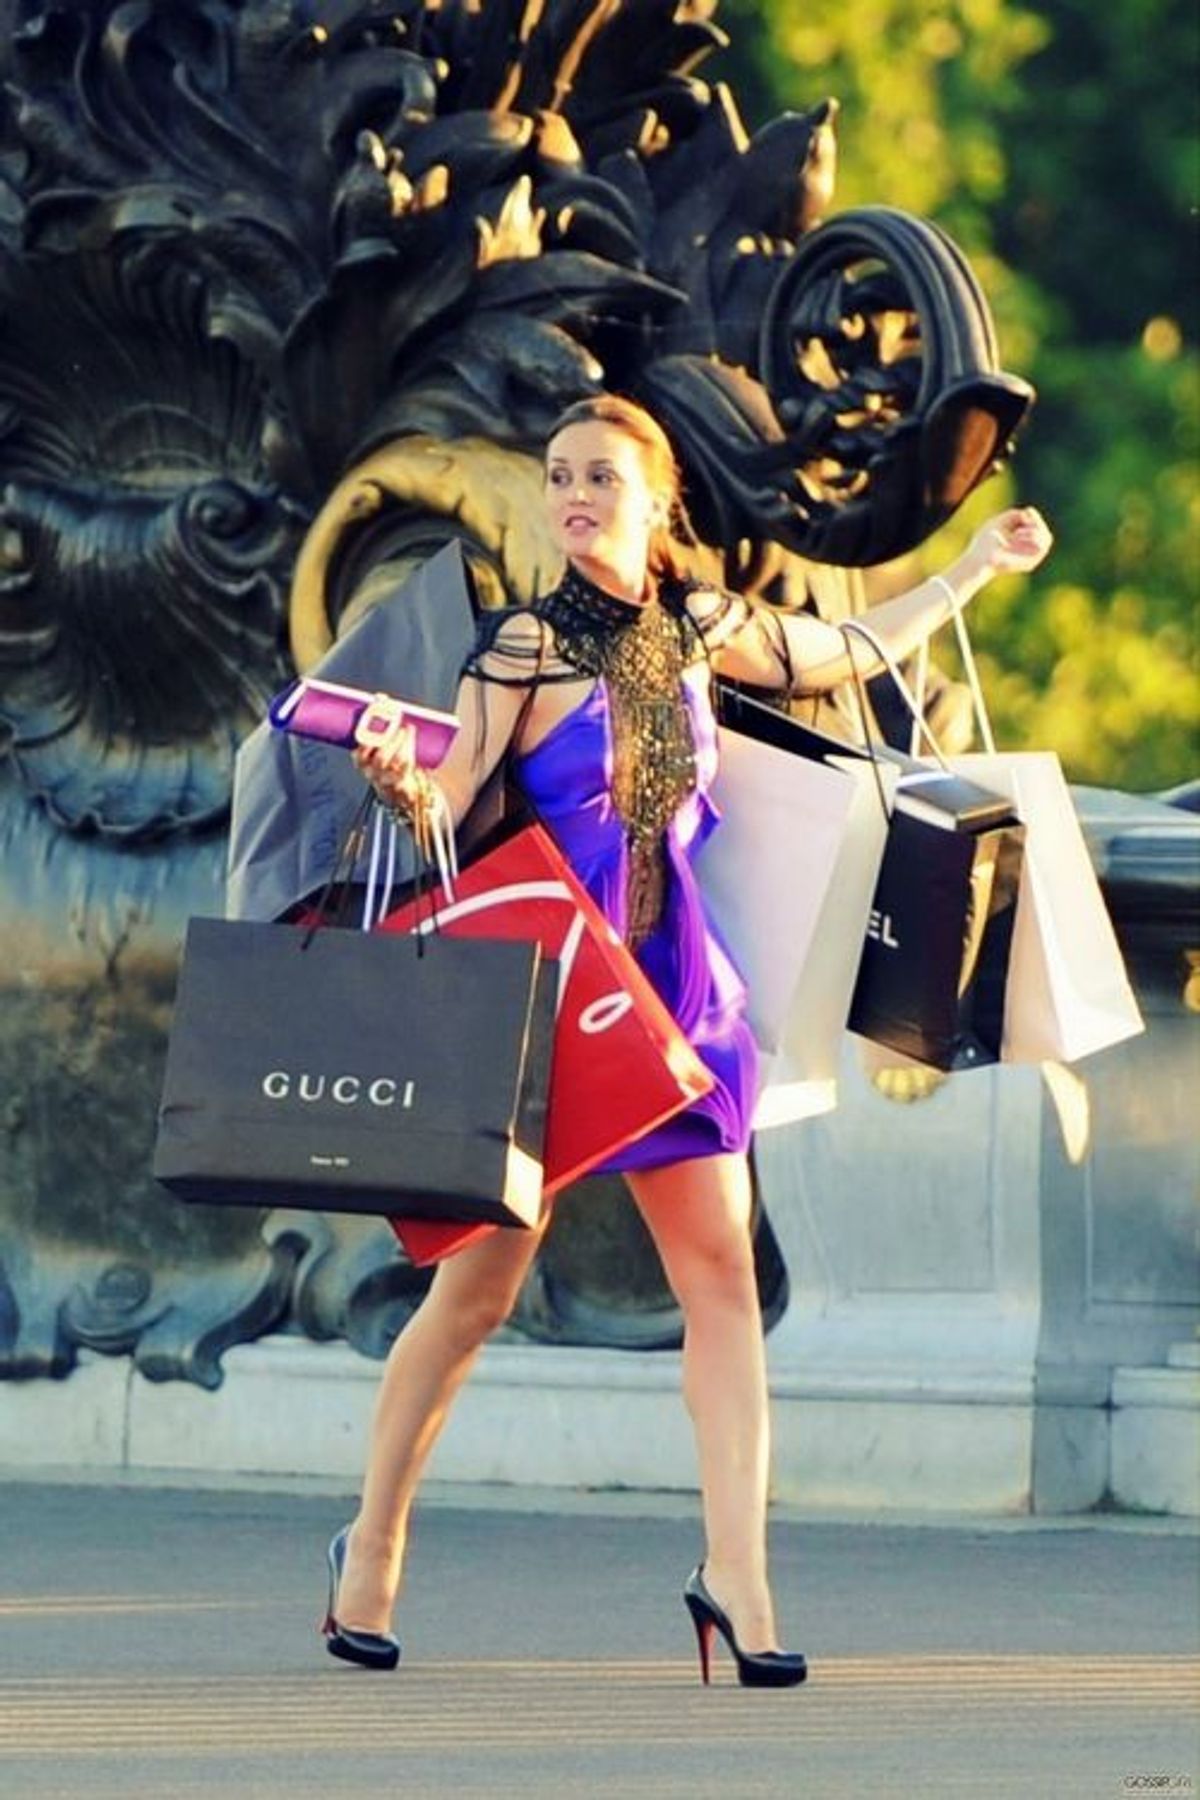 Confessions Of A Shopaholic: Six Truths About Shopping